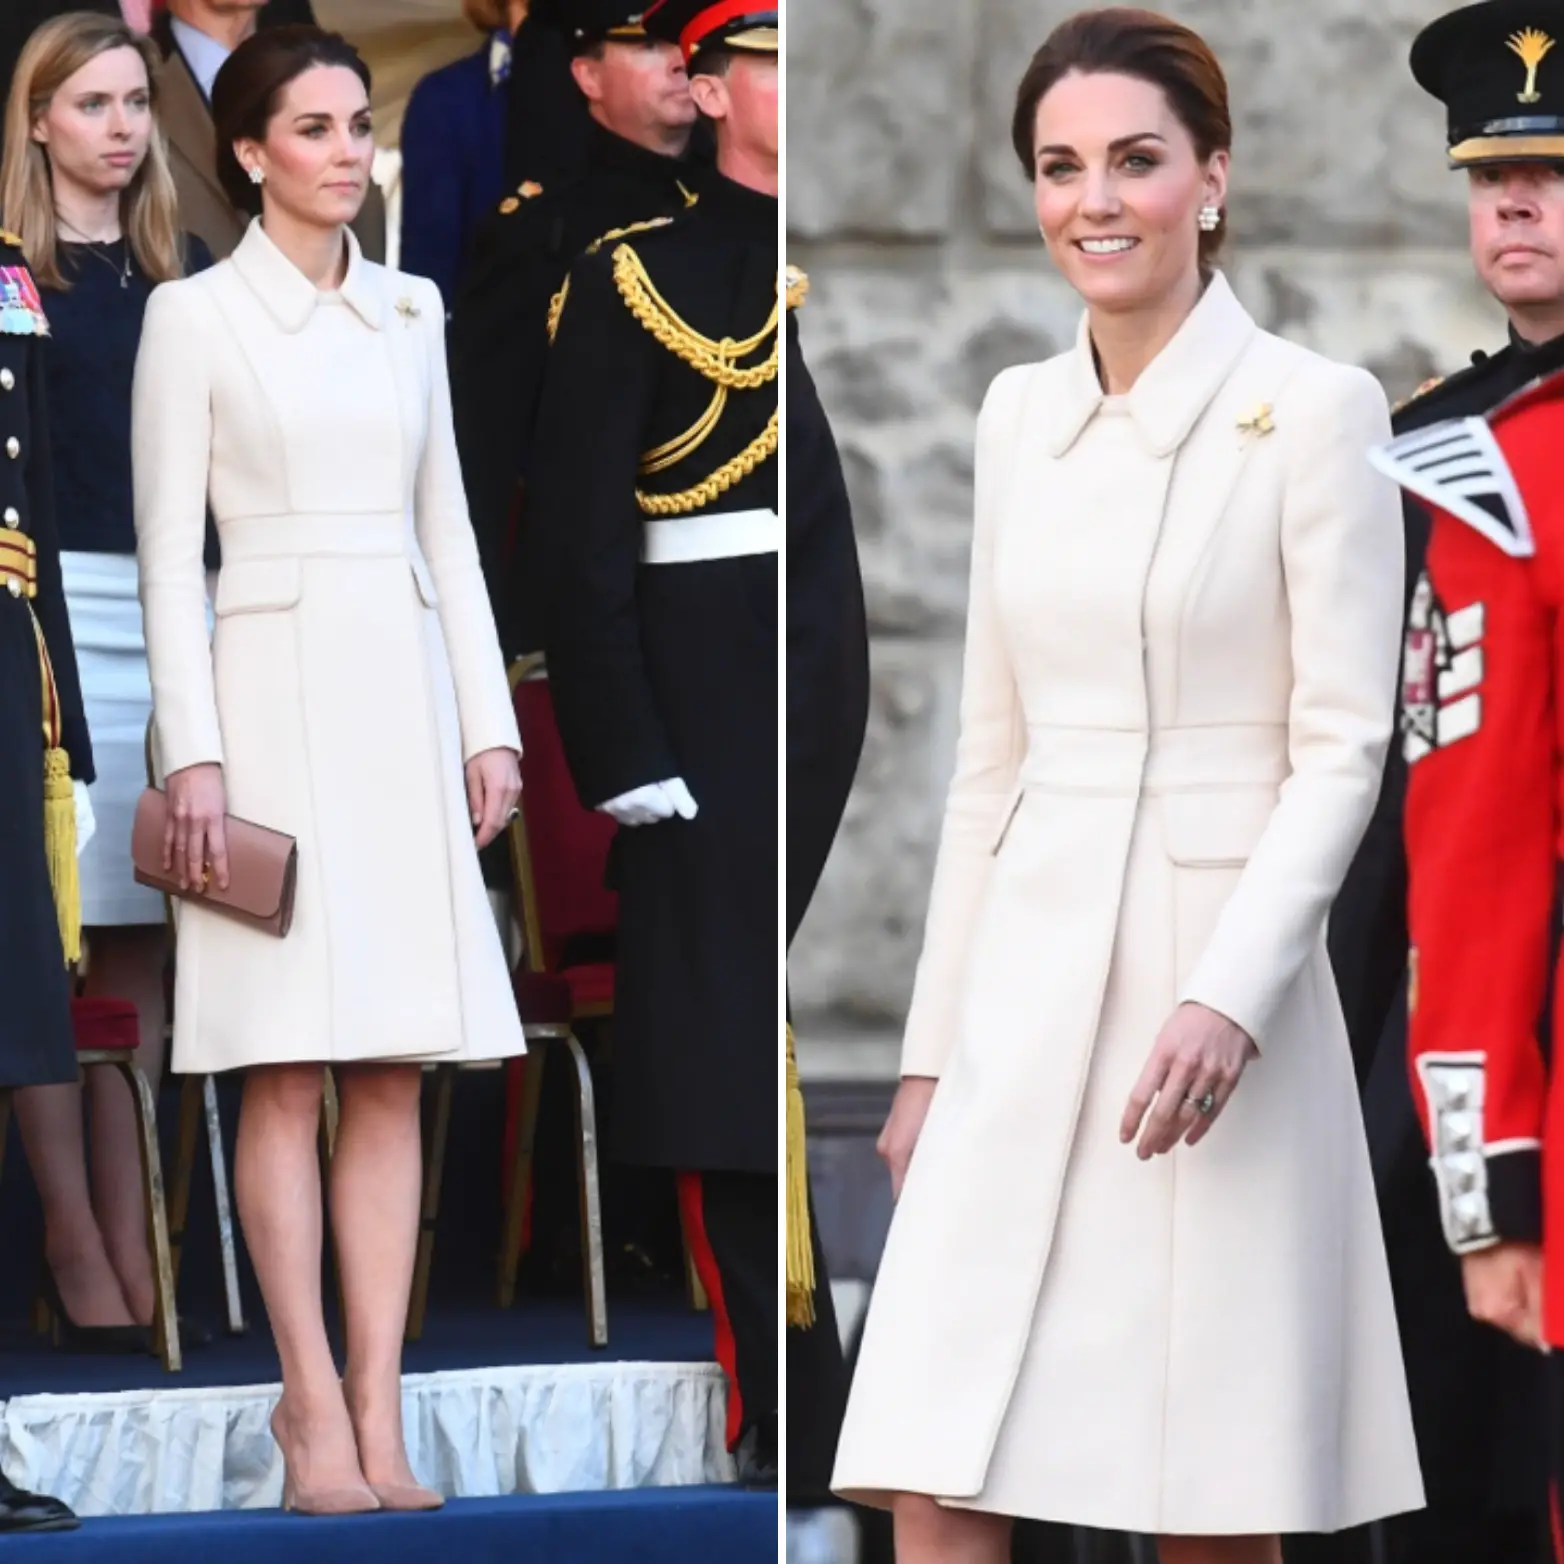 Duchess of Cambridge at Beating the Retreat Ceremony